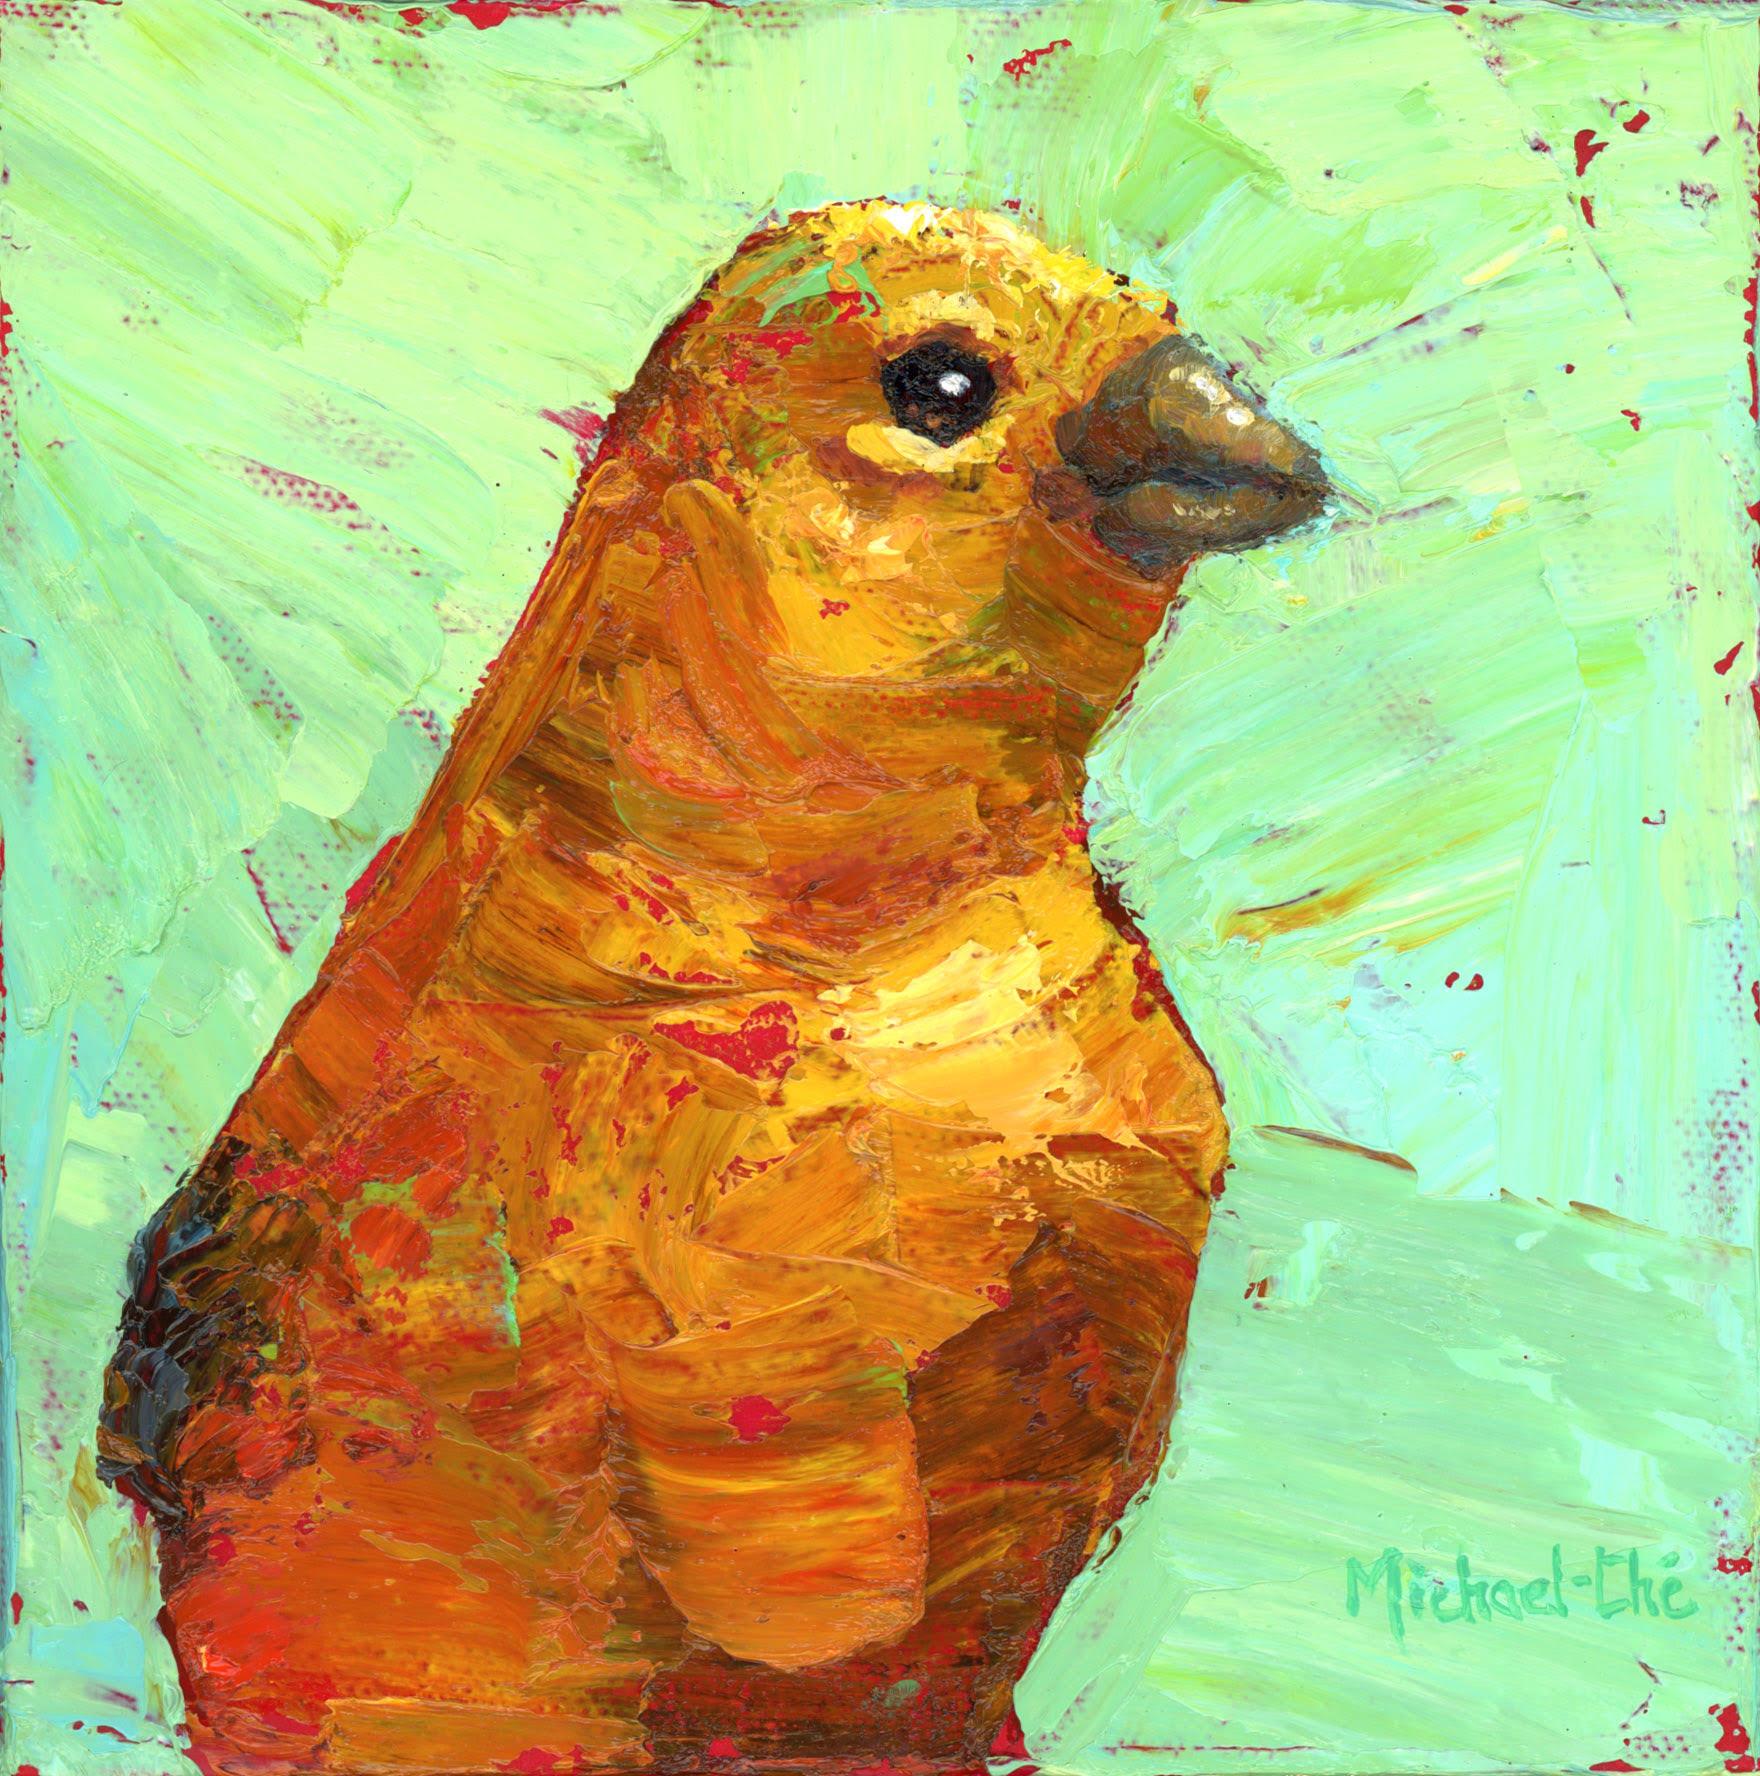 Michael-Che Swisher Animal Painting - "And It Glows" Impasto oil painting of yellow bird on green background